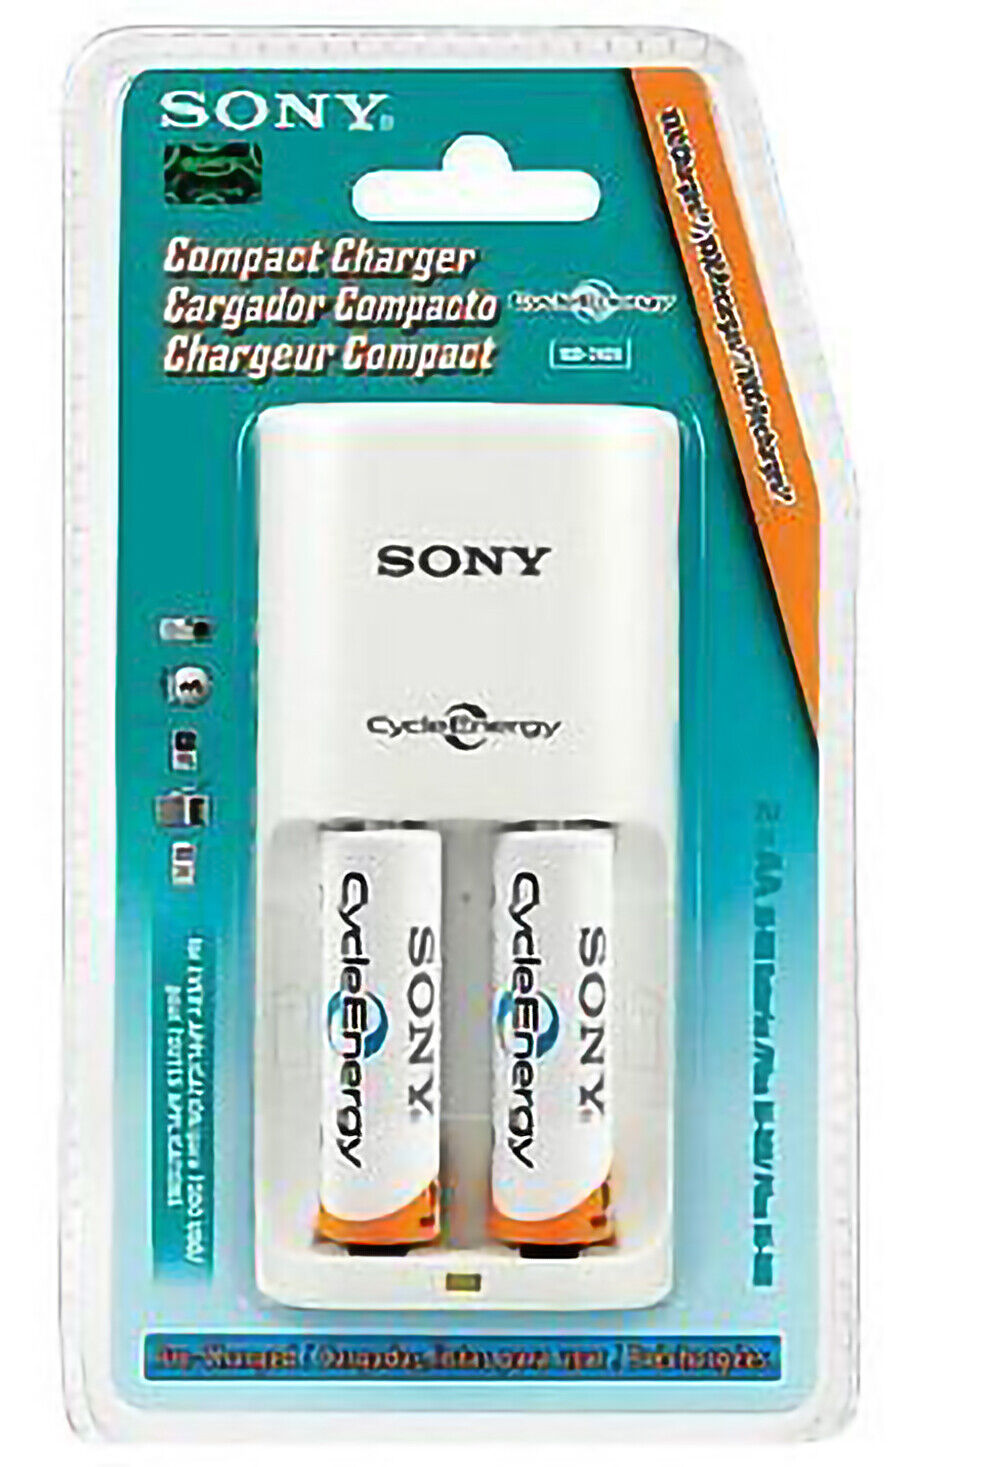 Sony Compact Charger